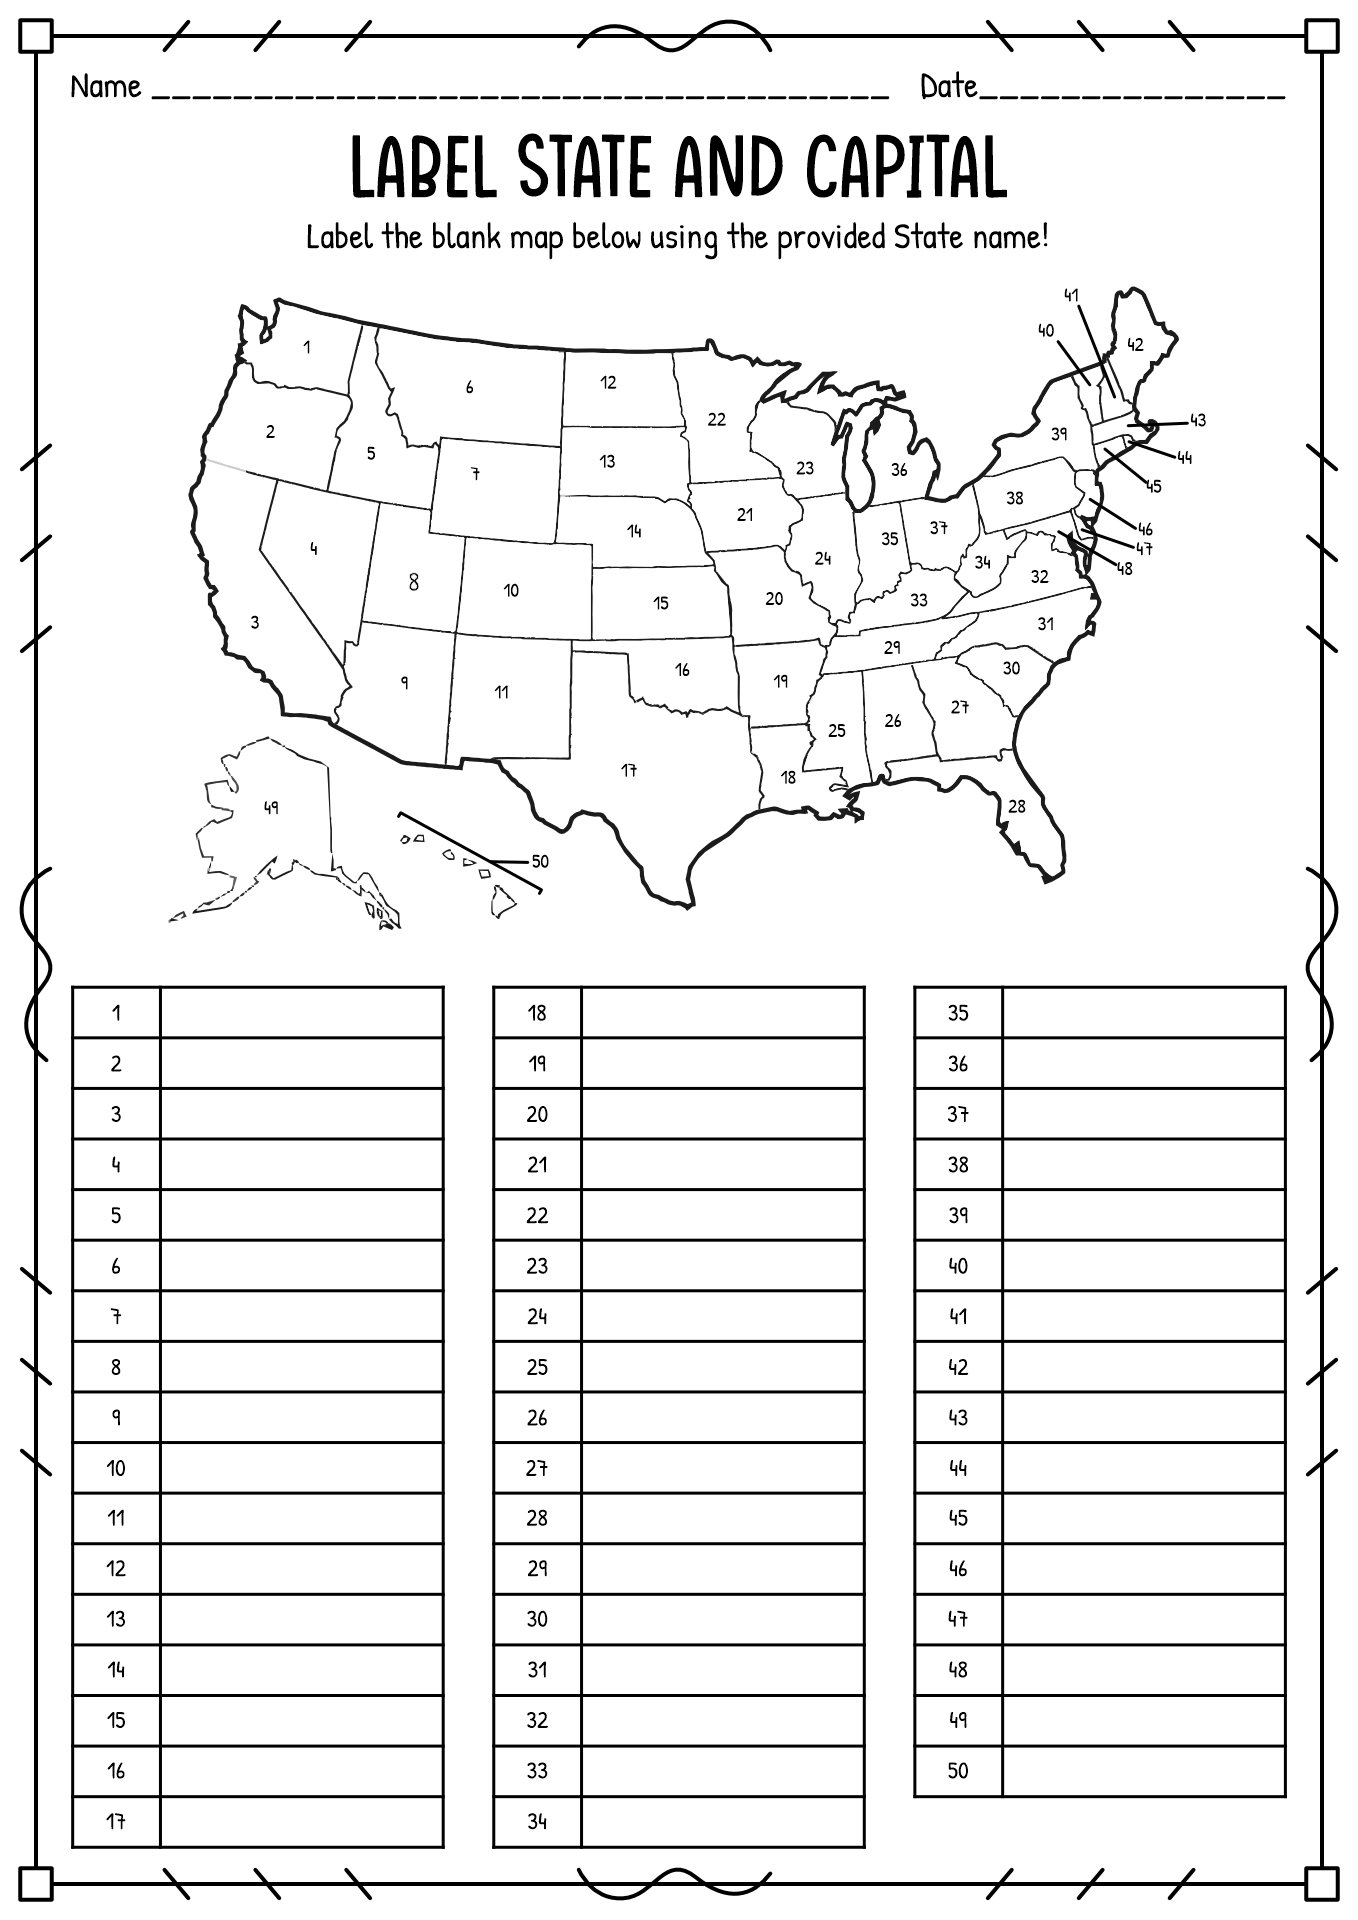 Label States and Capitals Worksheet